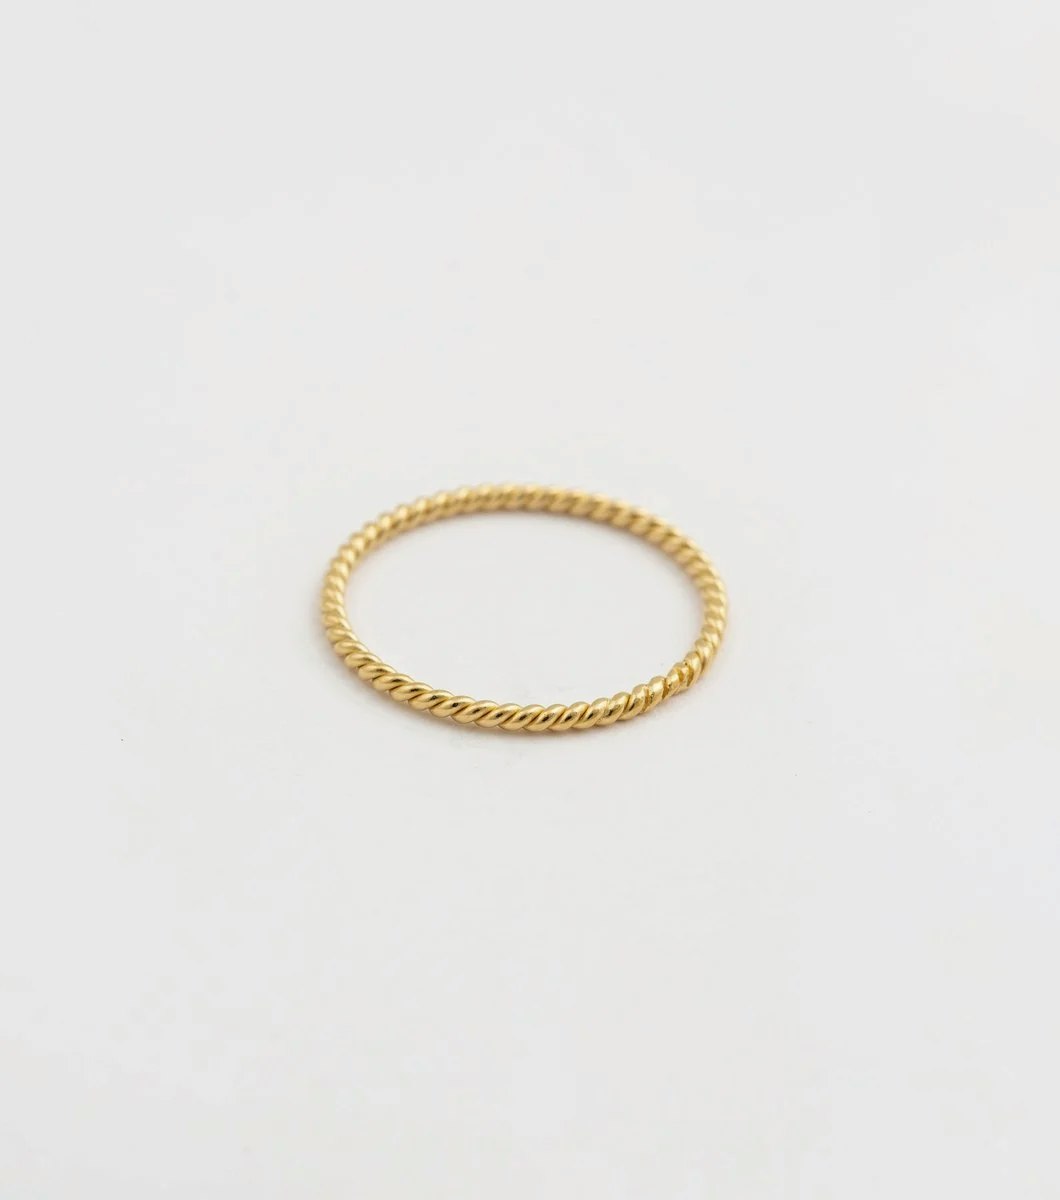 Tiny Twisted Ring Gold Syster P